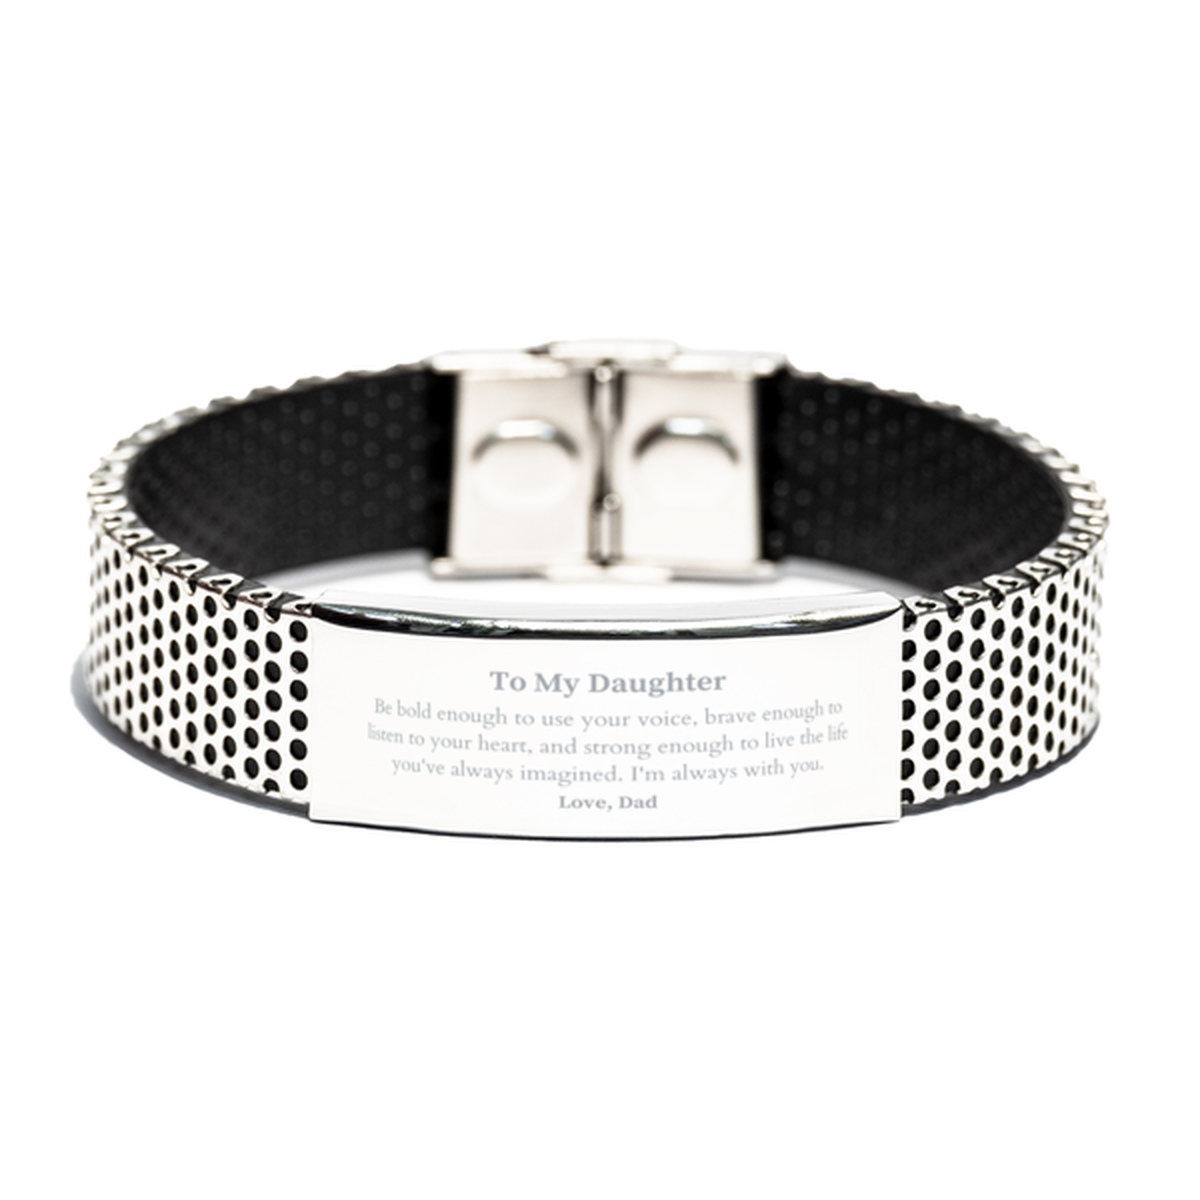 Keepsake Daughter Stainless Steel Bracelet Gift Idea Graduation Christmas Birthday Daughter from Dad, Daughter Be bold enough to use your voice, brave enough to listen to your heart. Love, Dad